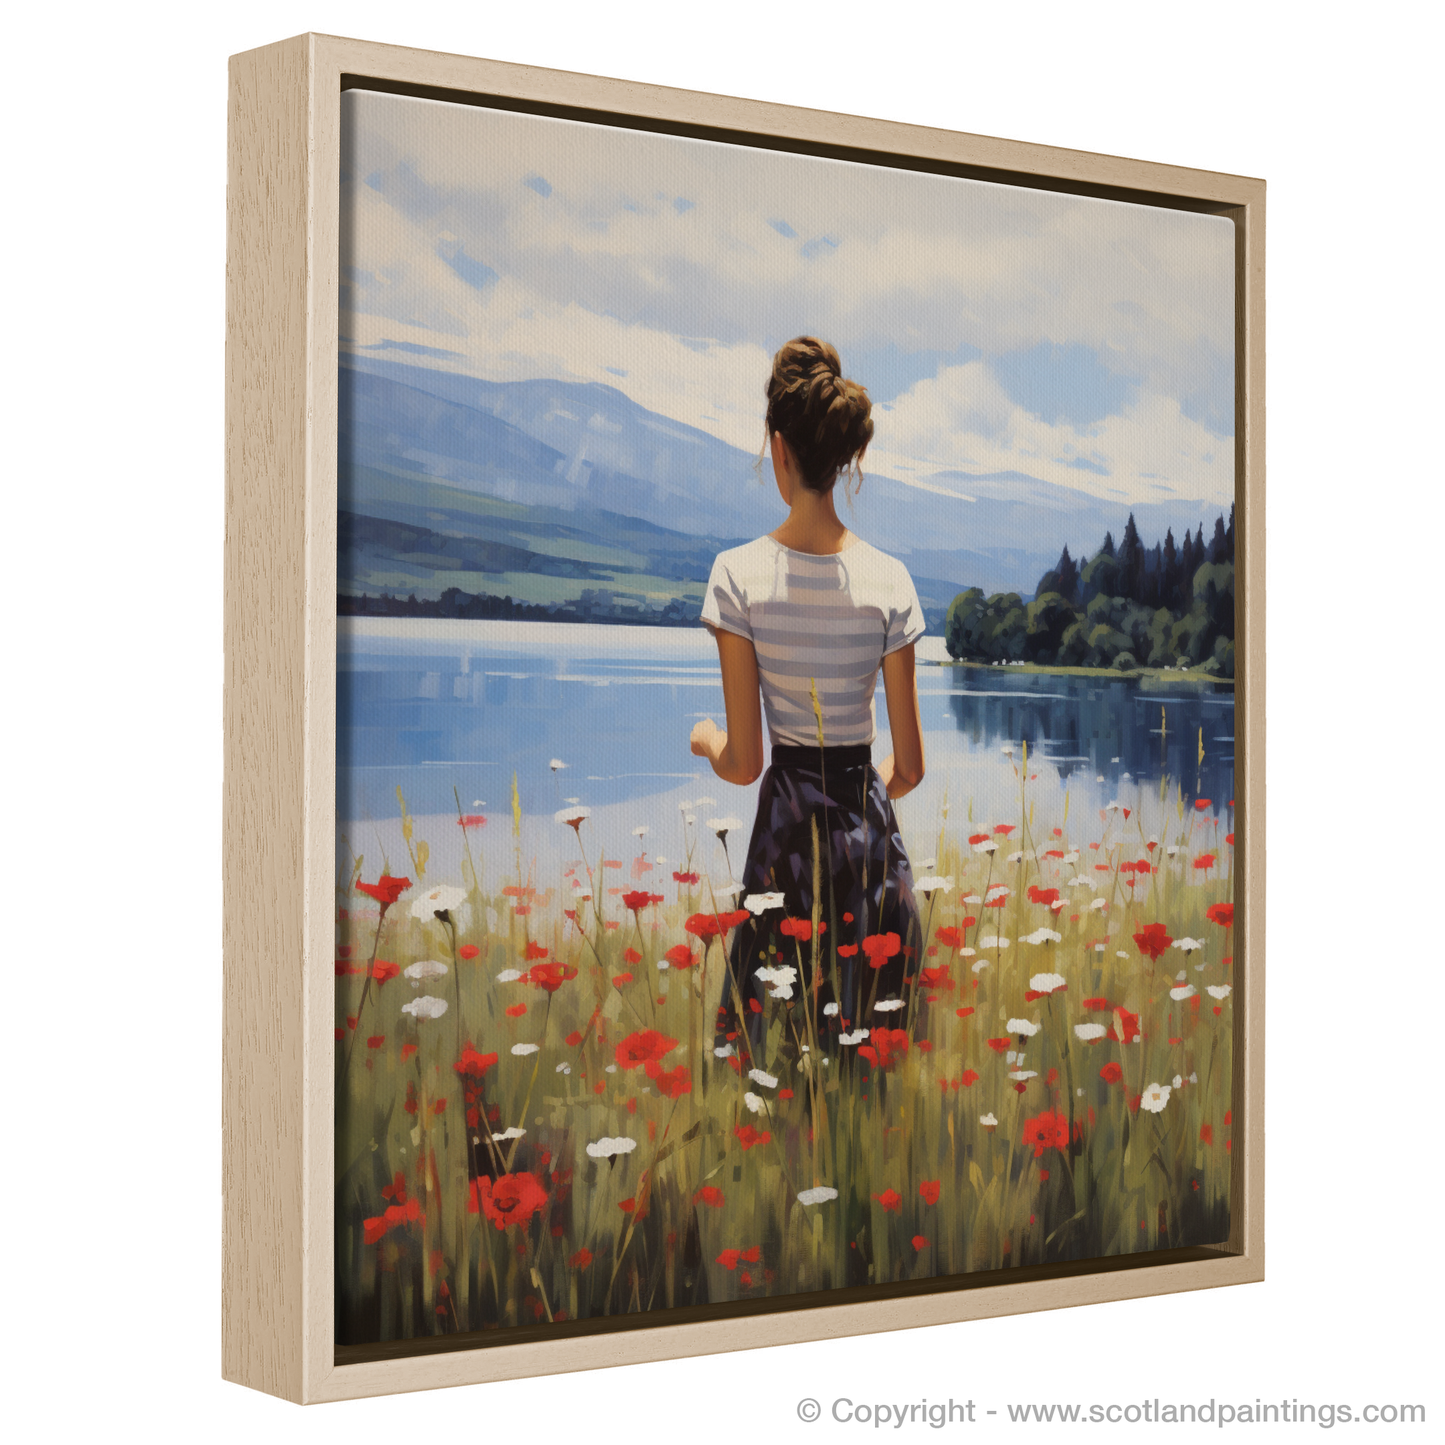 Painting and Art Print of Wildflowers by Loch Lomond entitled "Wildflowers by Loch Lomond: A Serene Encounter".